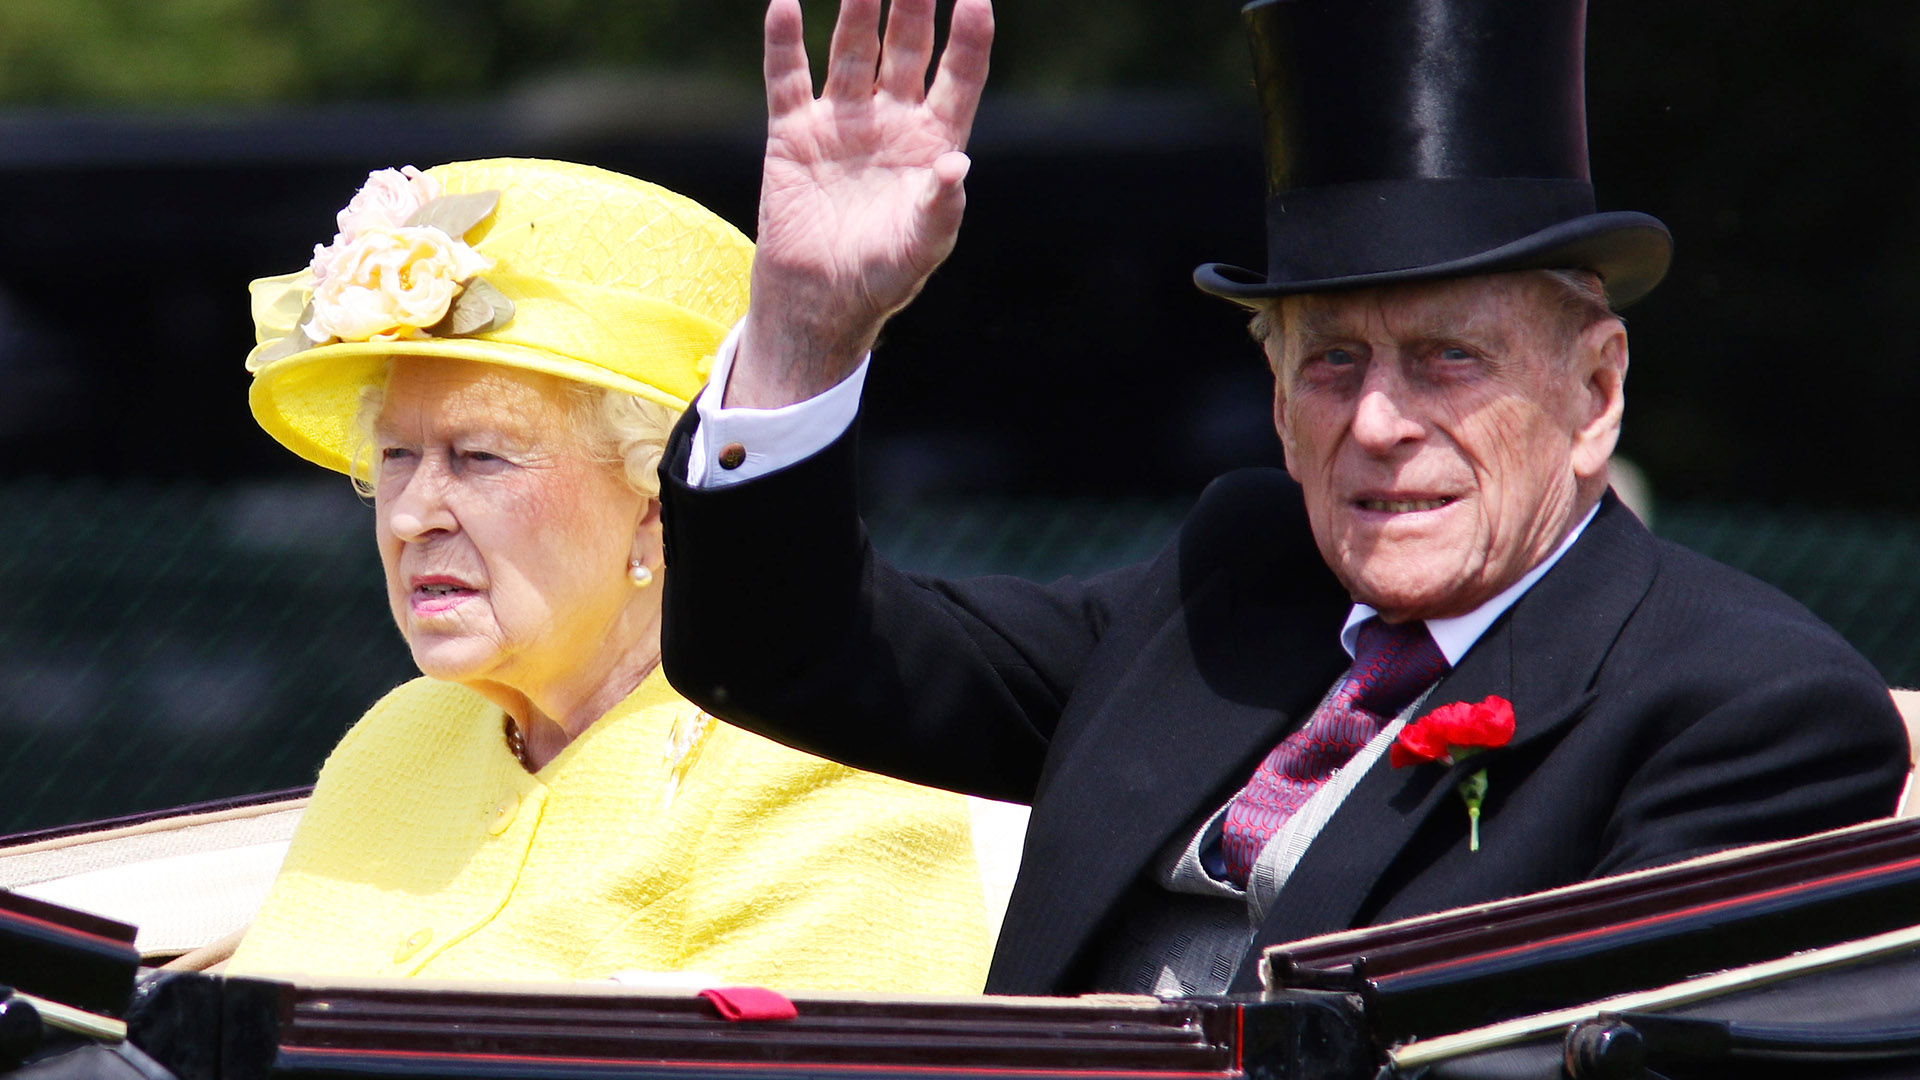 5 Longest Marriages in Royal Family History (No. 5 Lasted 41 years!)